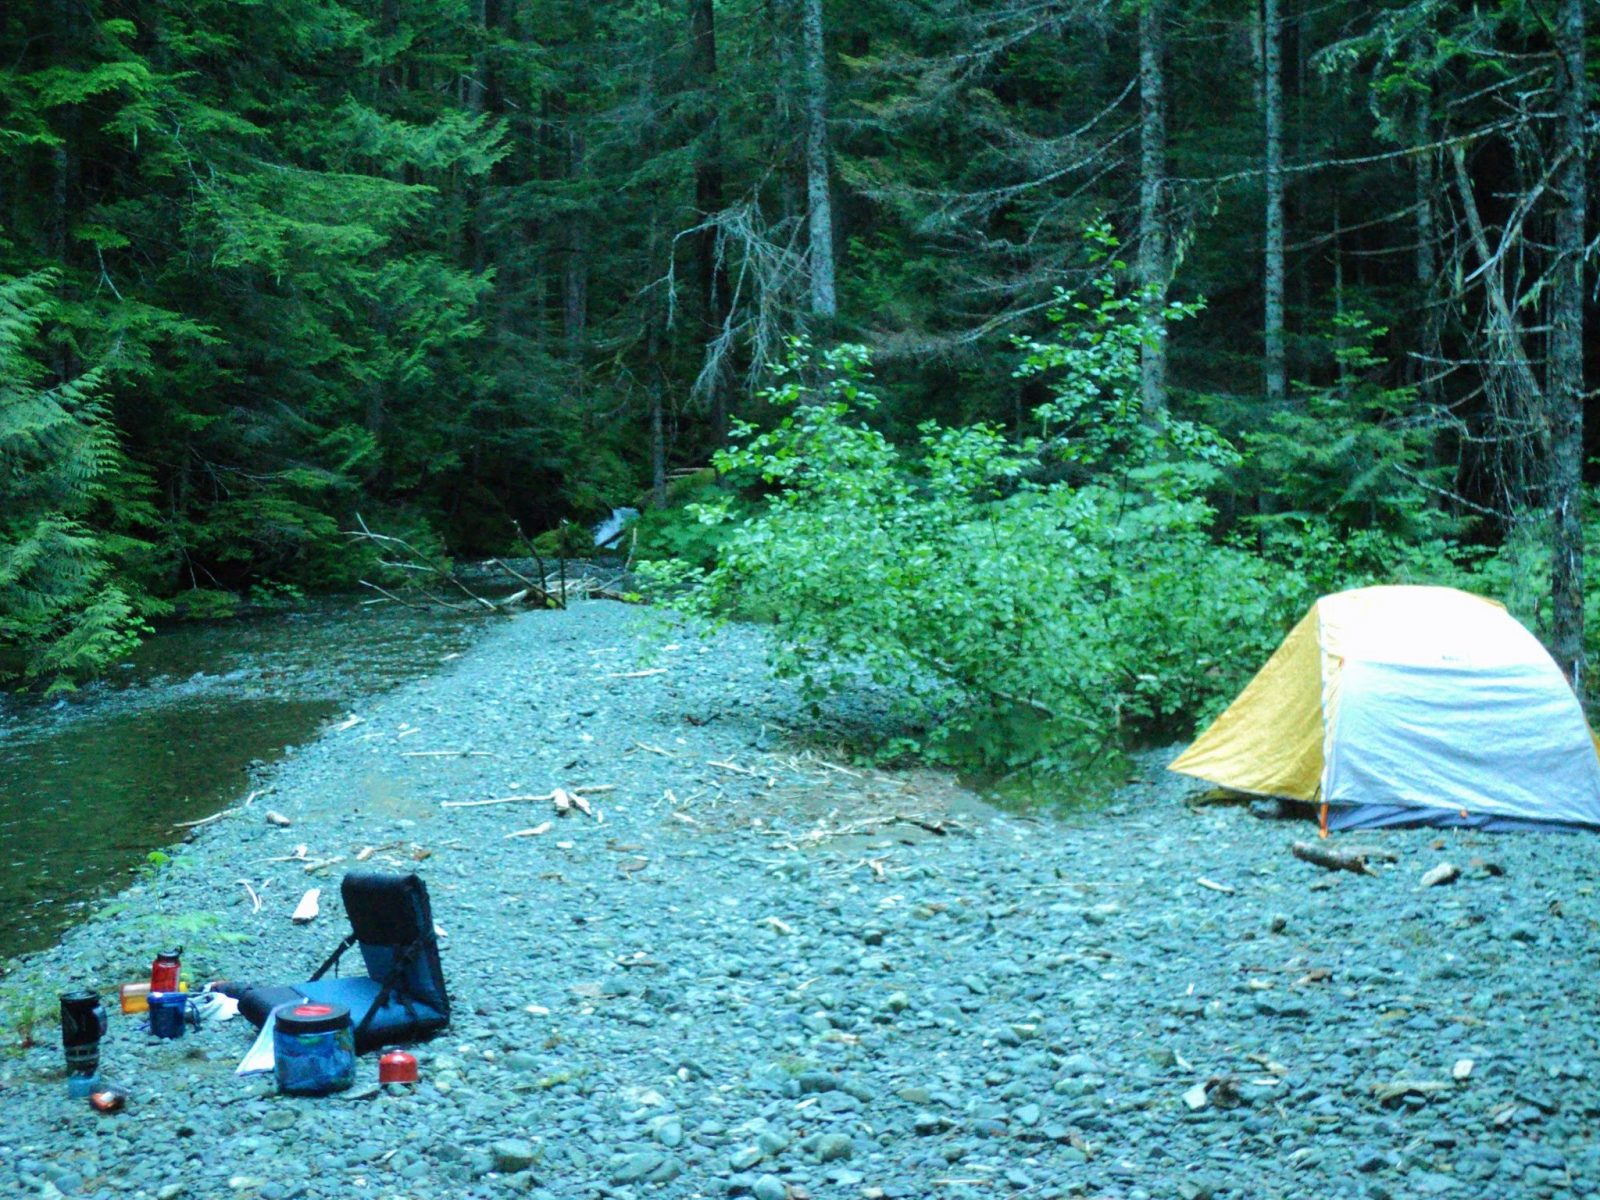 A gravel bar next to a creek in an evergreen tree forest. There is a yellow and white tent set up on the gravel and camping equipment for cooking dinner nearby.